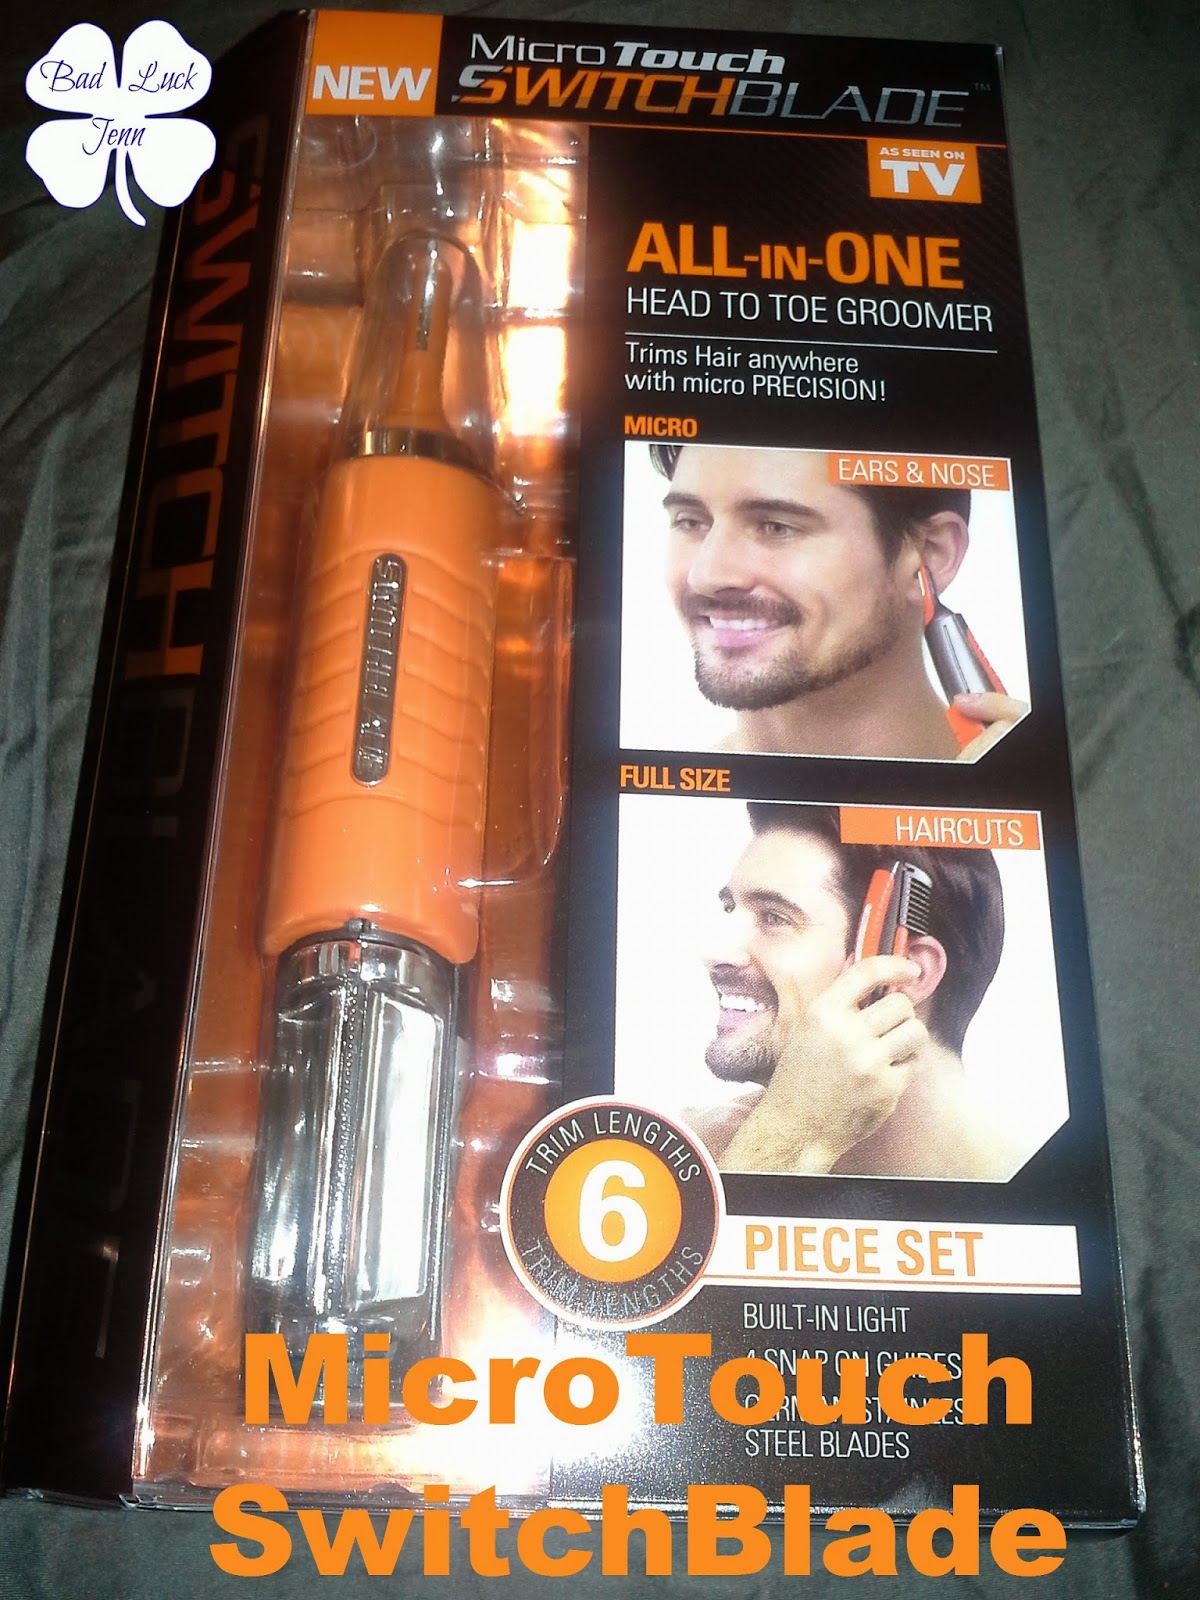 switchblade trimmer review